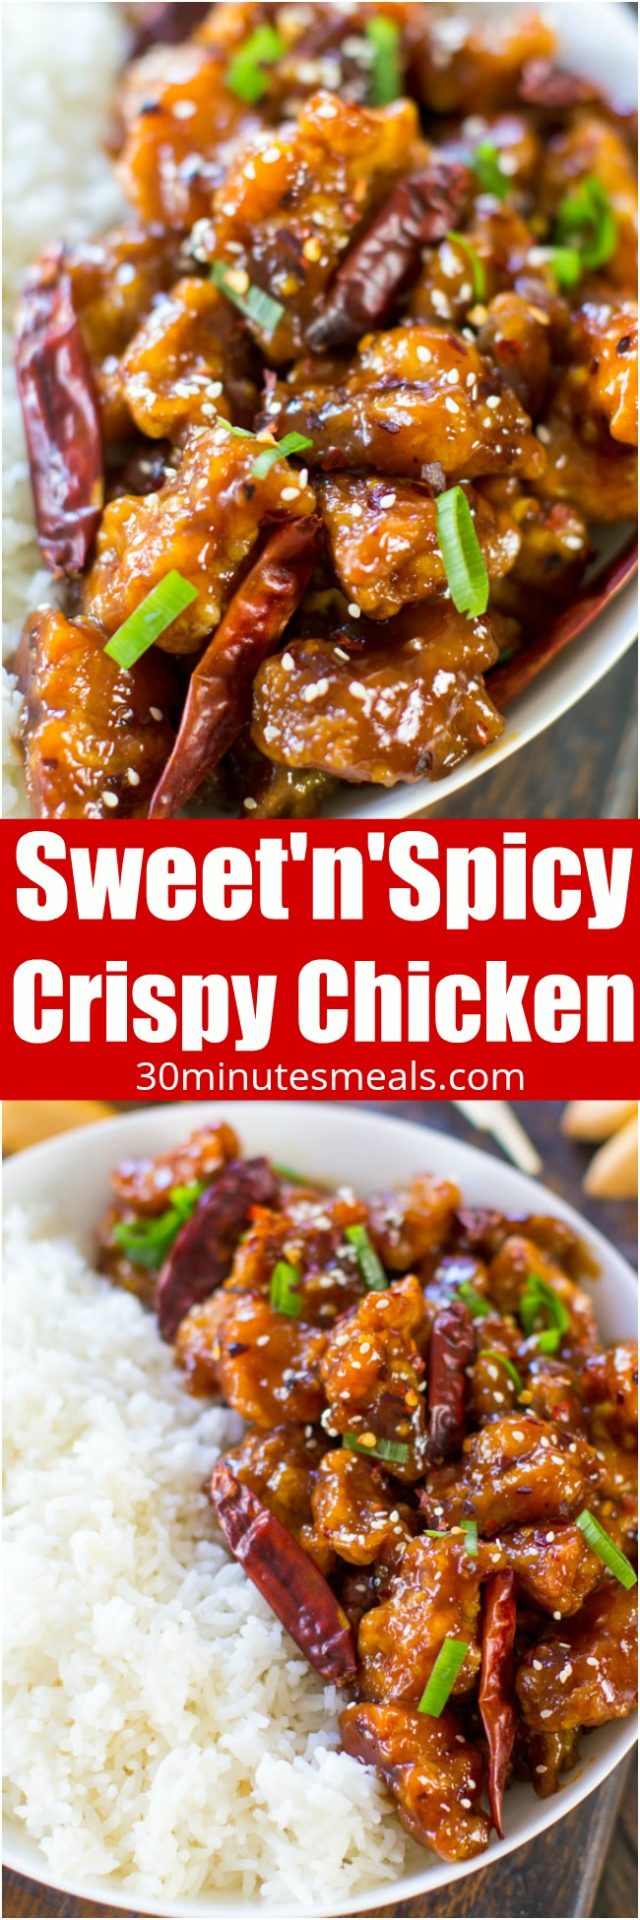 Sweet and Spicy Chicken Recipe: Easy & Quick [VIDEO] - 30 minutes meals